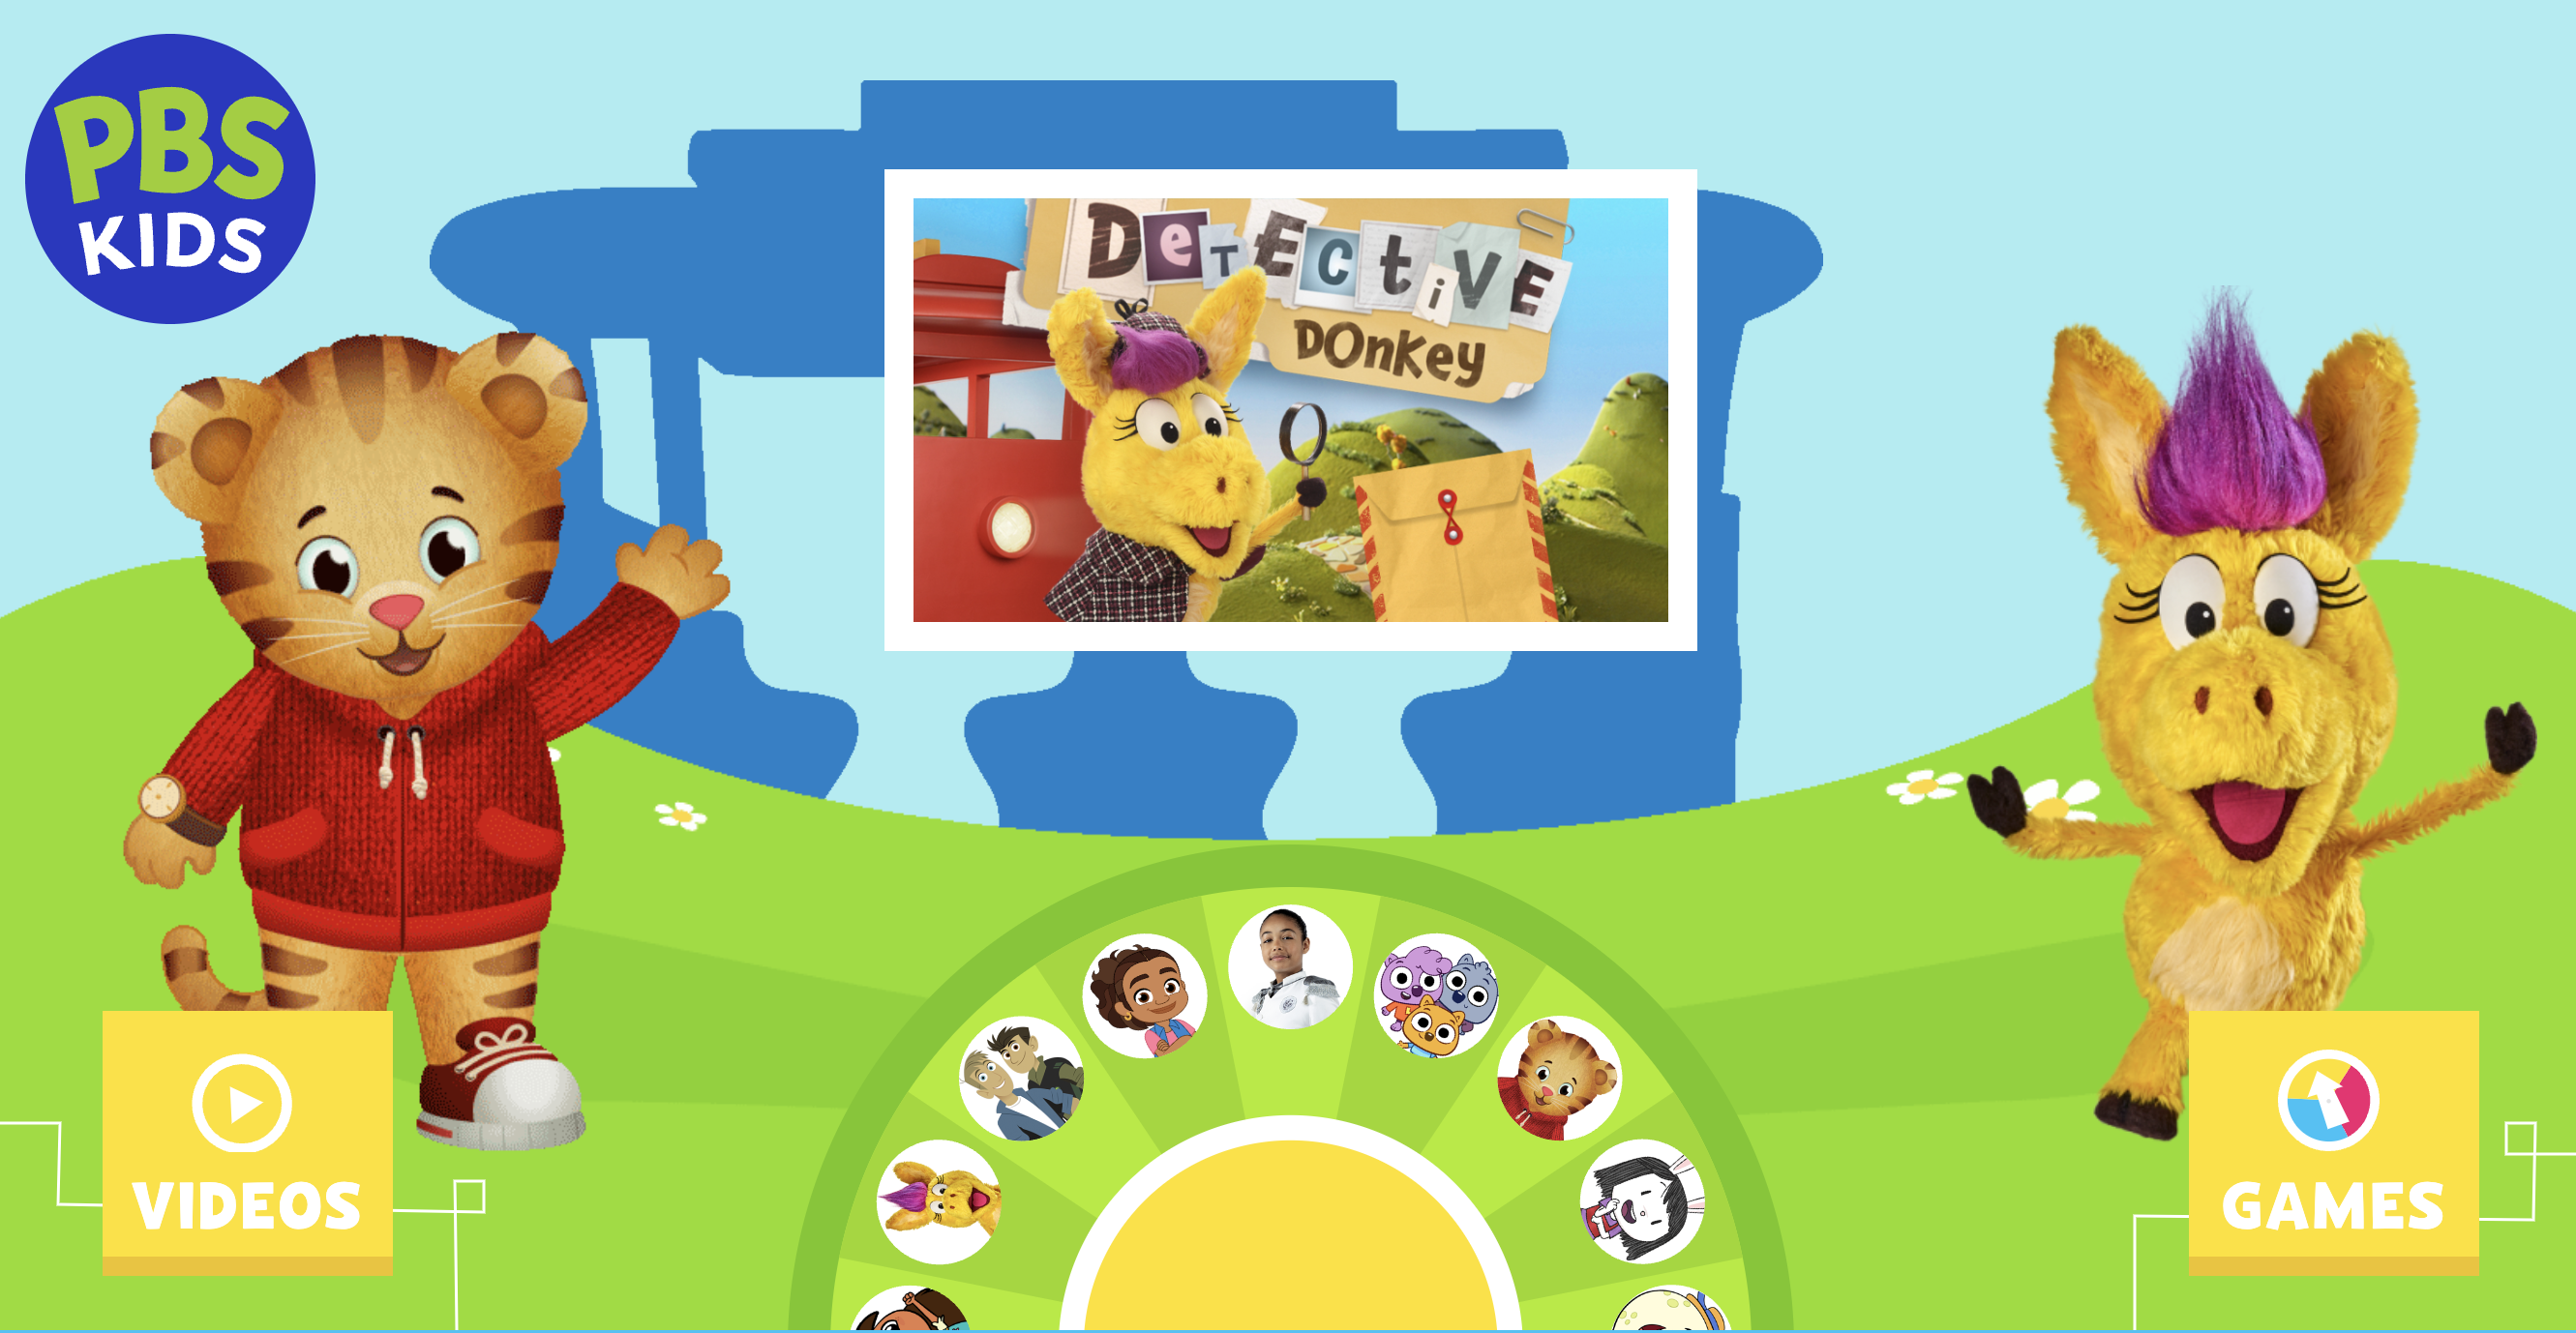 image shows a screenshot of the PBS kids website